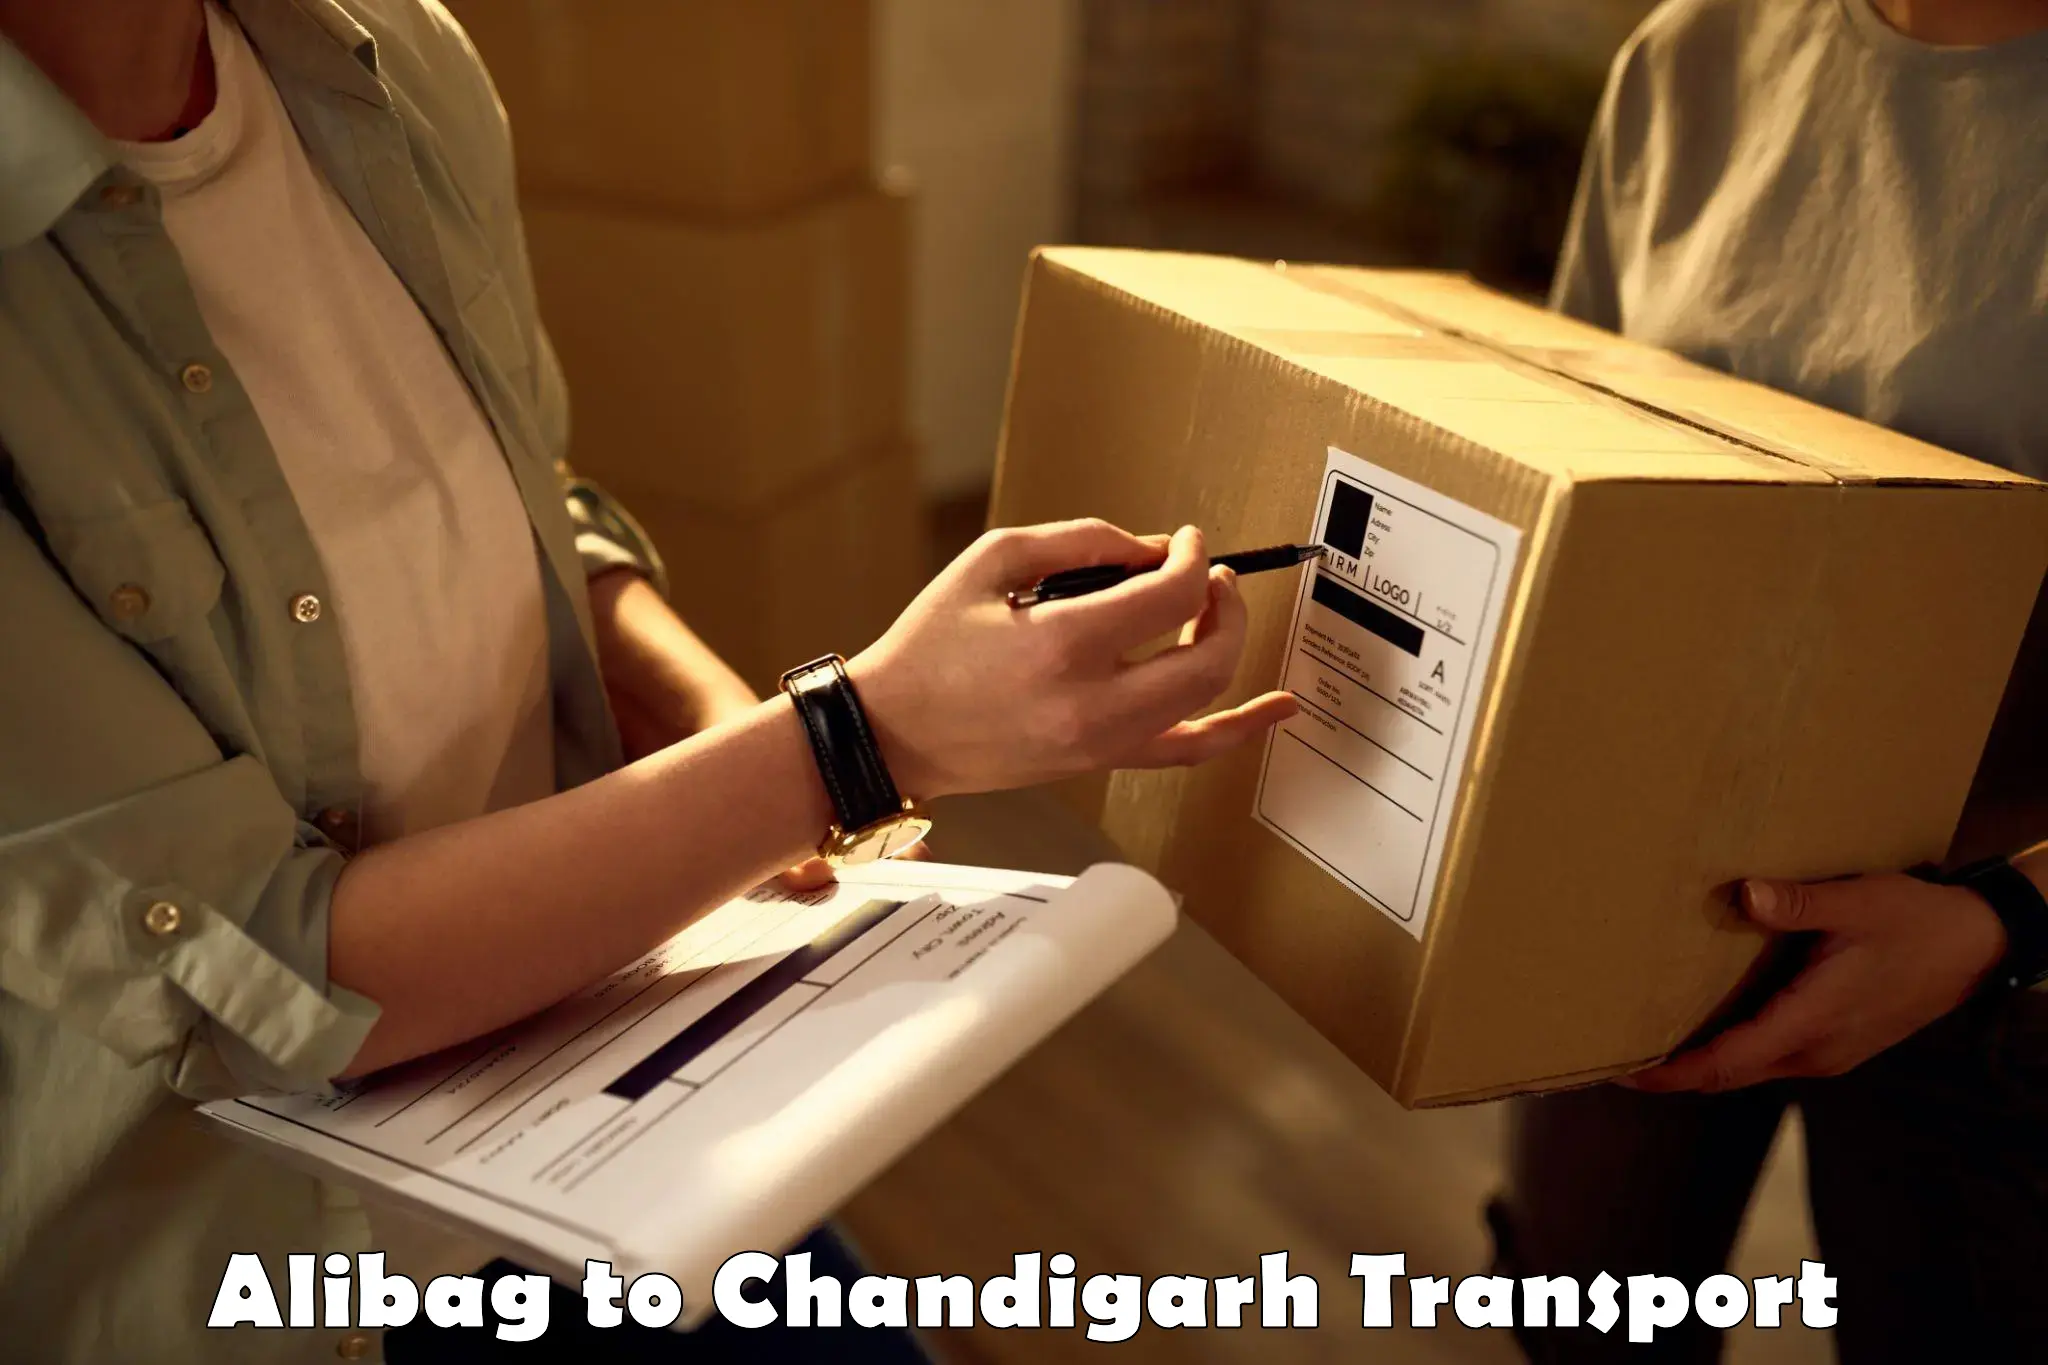 Transport bike from one state to another Alibag to Chandigarh